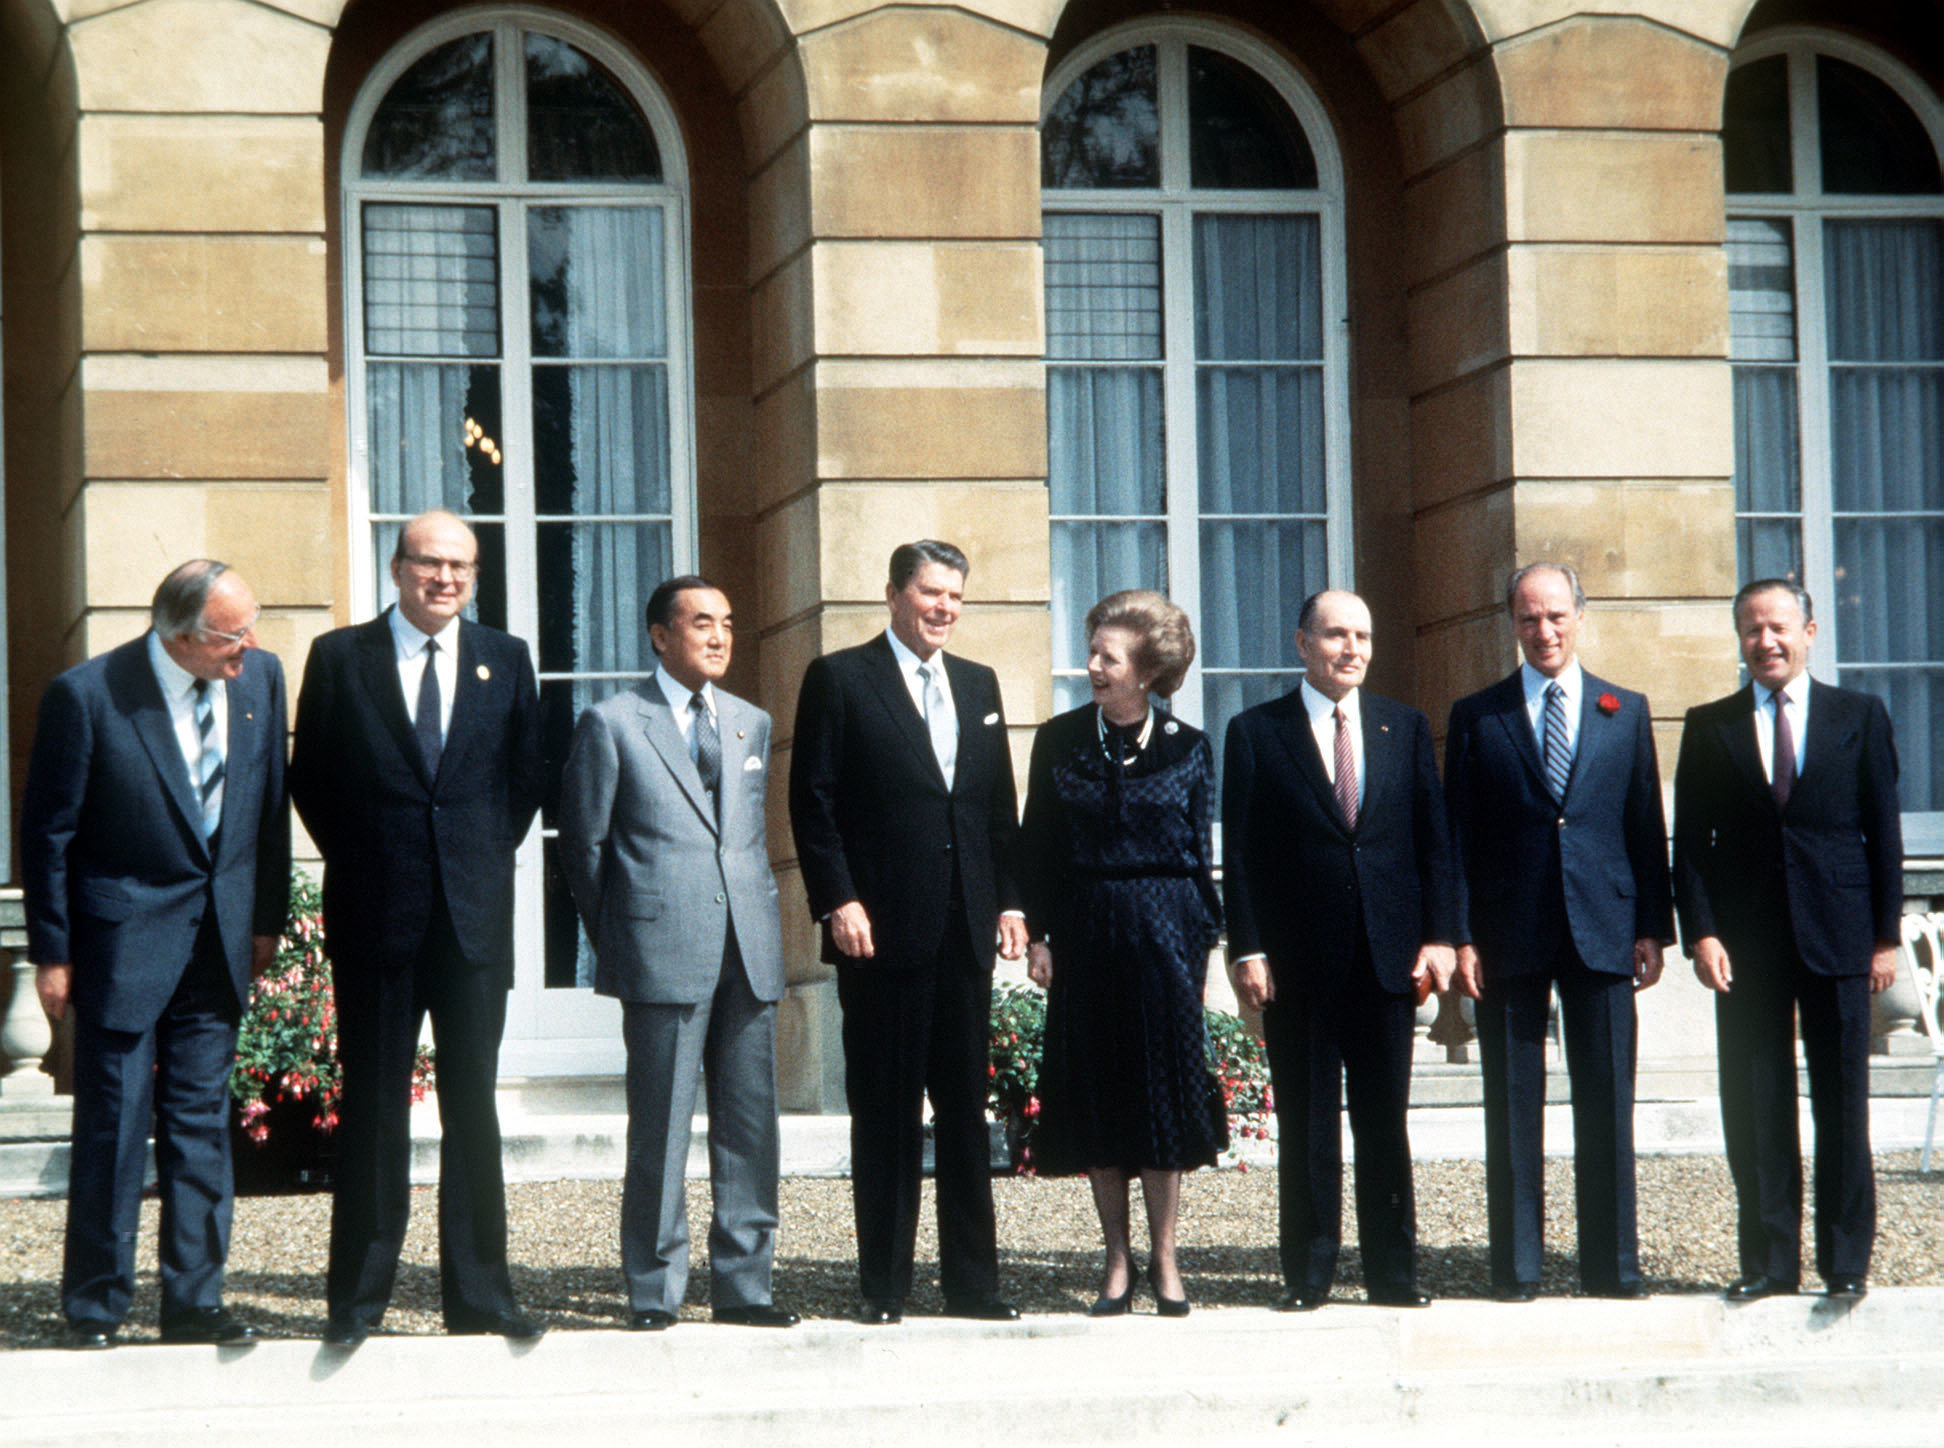 Heads of delegations assembled at Lancaster House, London, on the second day of the seven-nation London Economic Summit. * (L-R) West German Chancellor Helmut Kohl, Italys Premier Benito Craxi, Japans Prime Minister Yasuhiro Nakasone, Americas